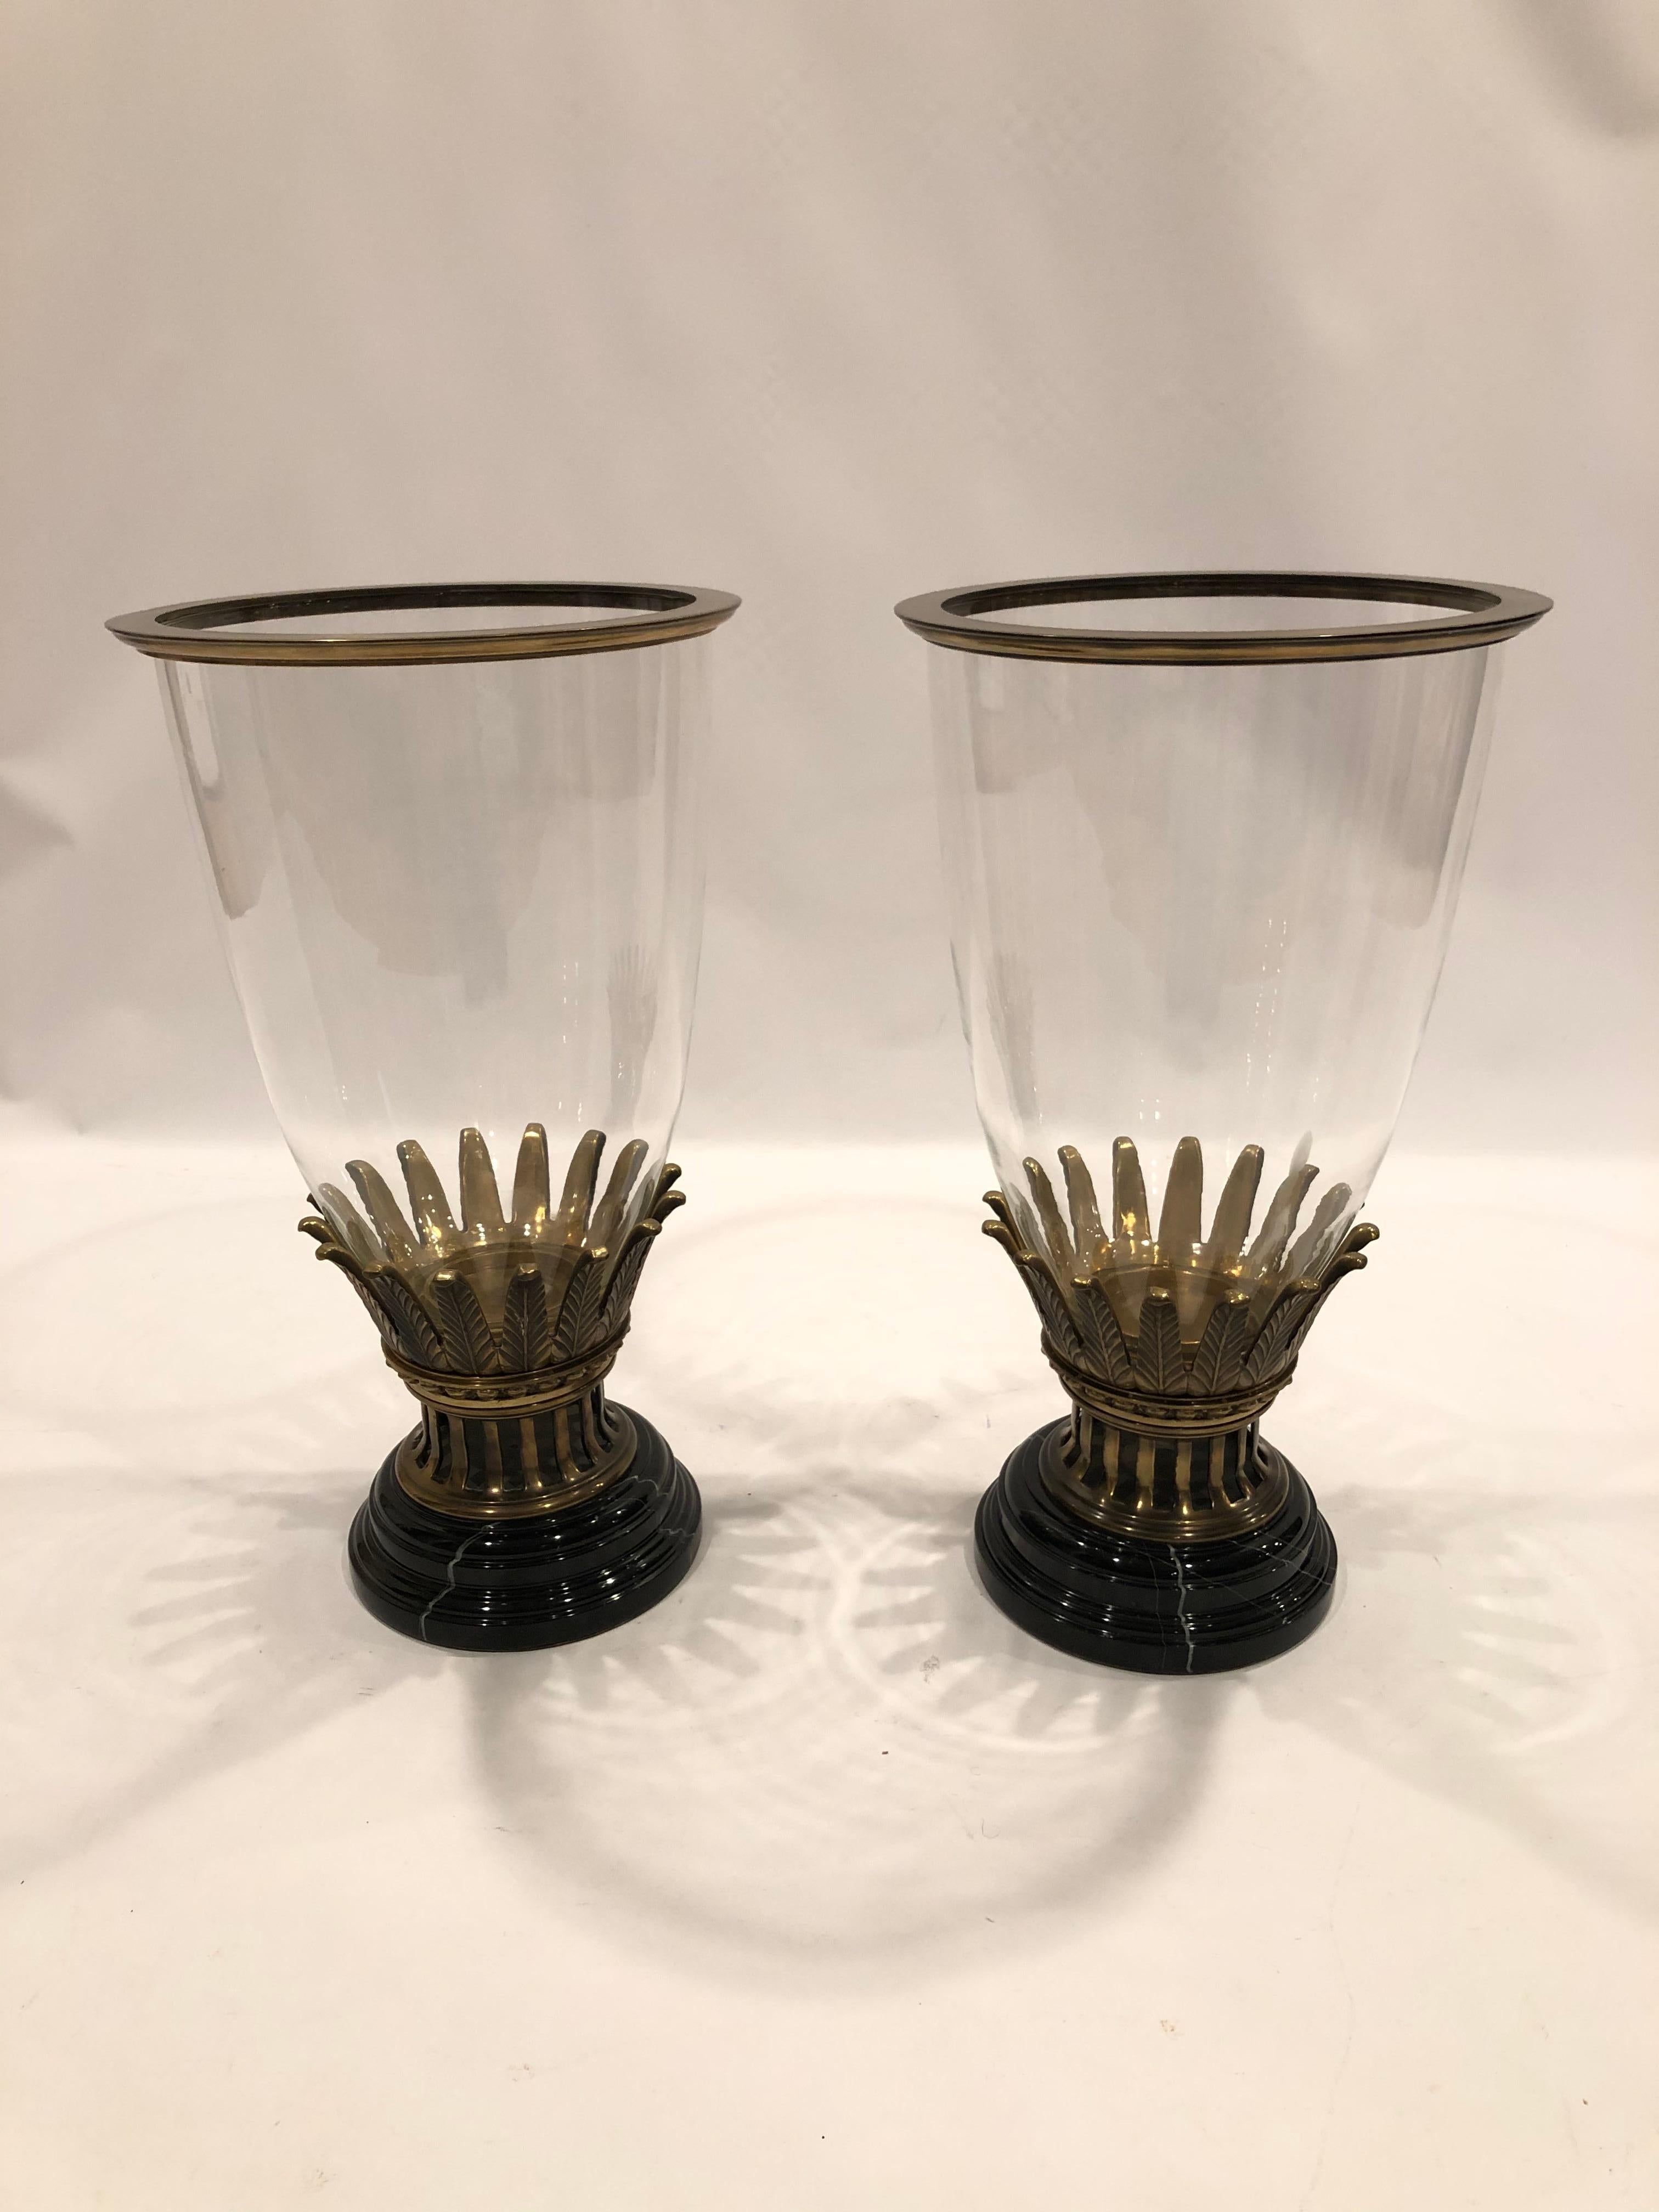 Large gutsy very impressive pair of glass hurricanes having bronze and black marble bases. There are very decorative bronze crowns that hold the thin elegant glass domes, and round discs unscrew to hold the glass in place. Beautifully engineered and